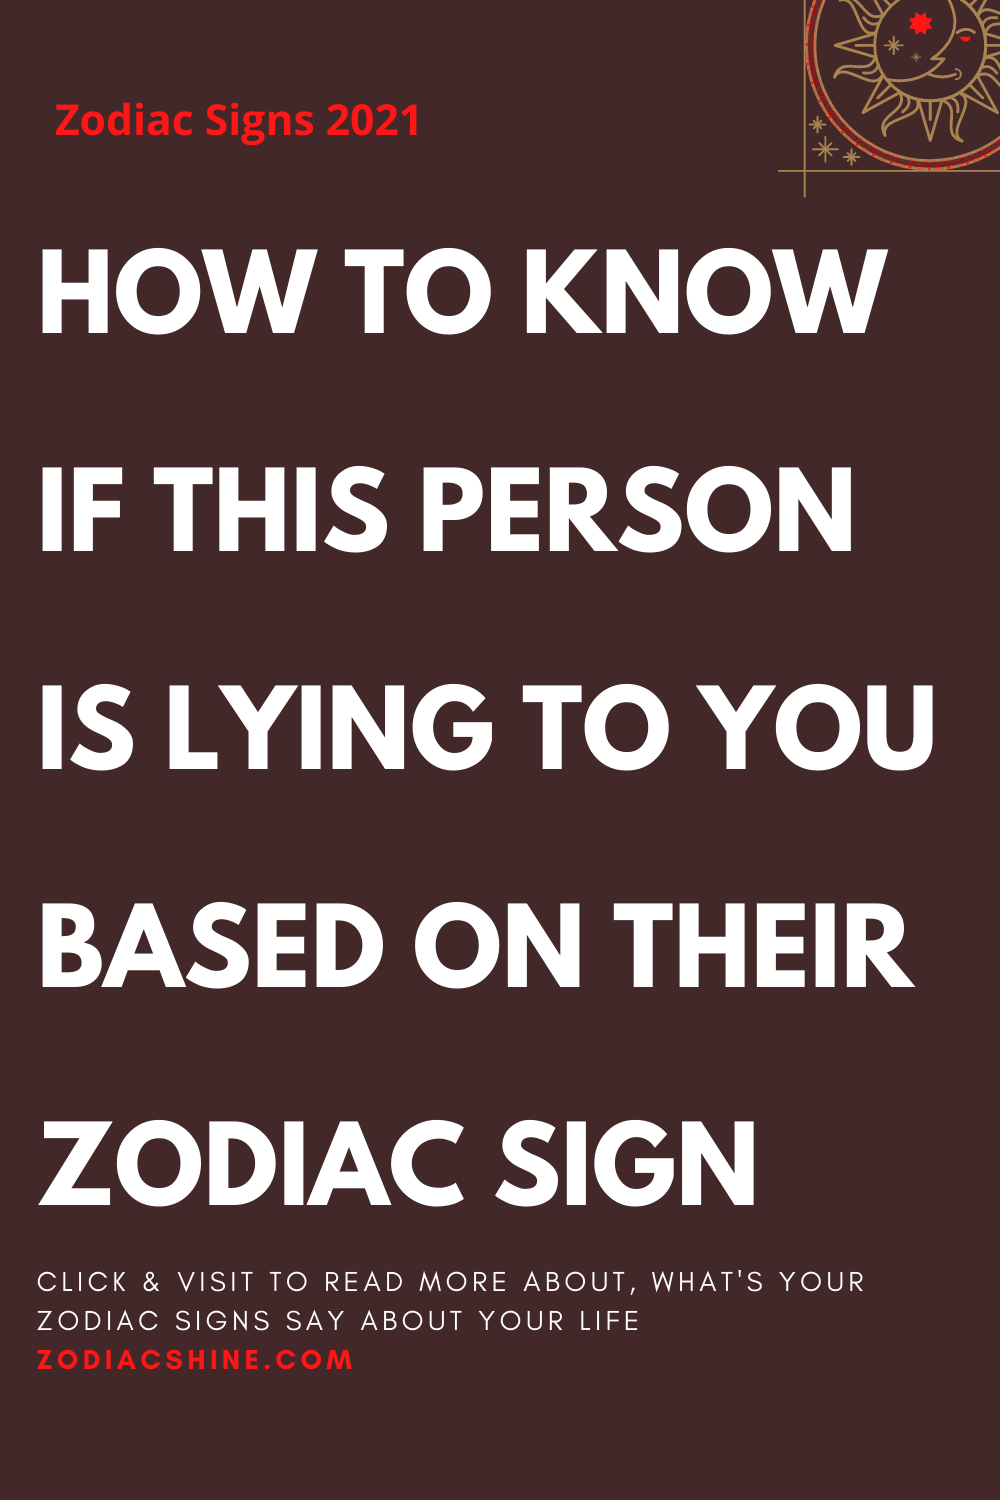 HOW TO KNOW IF THIS PERSON IS LYING TO YOU BASED ON THEIR ZODIAC SIGN